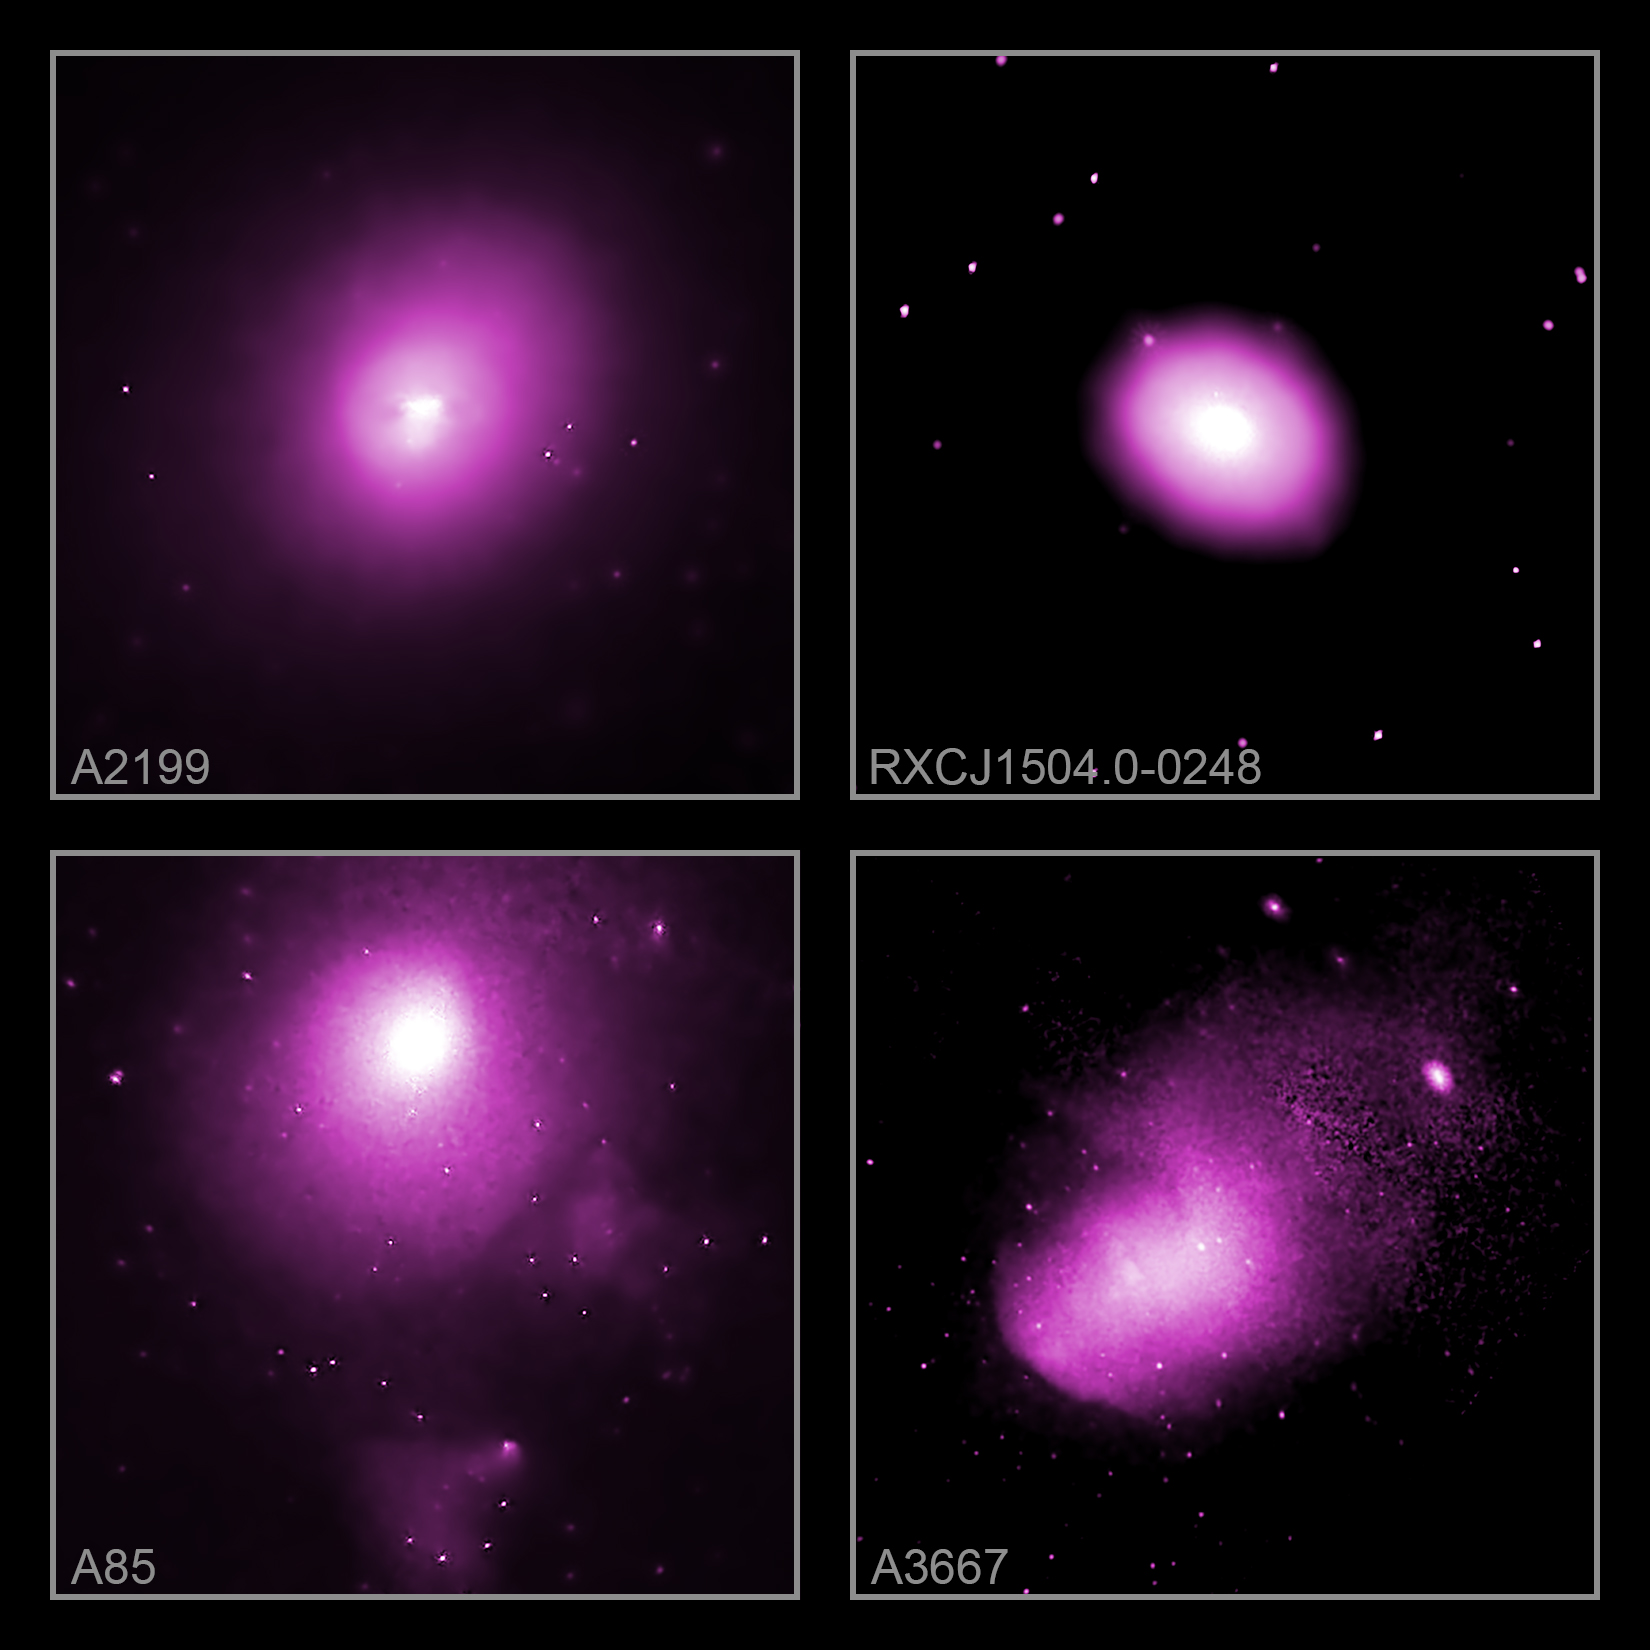 These images show a map of the full sky and Chandra images of four galaxy clusters that were analyzed in a large survey.